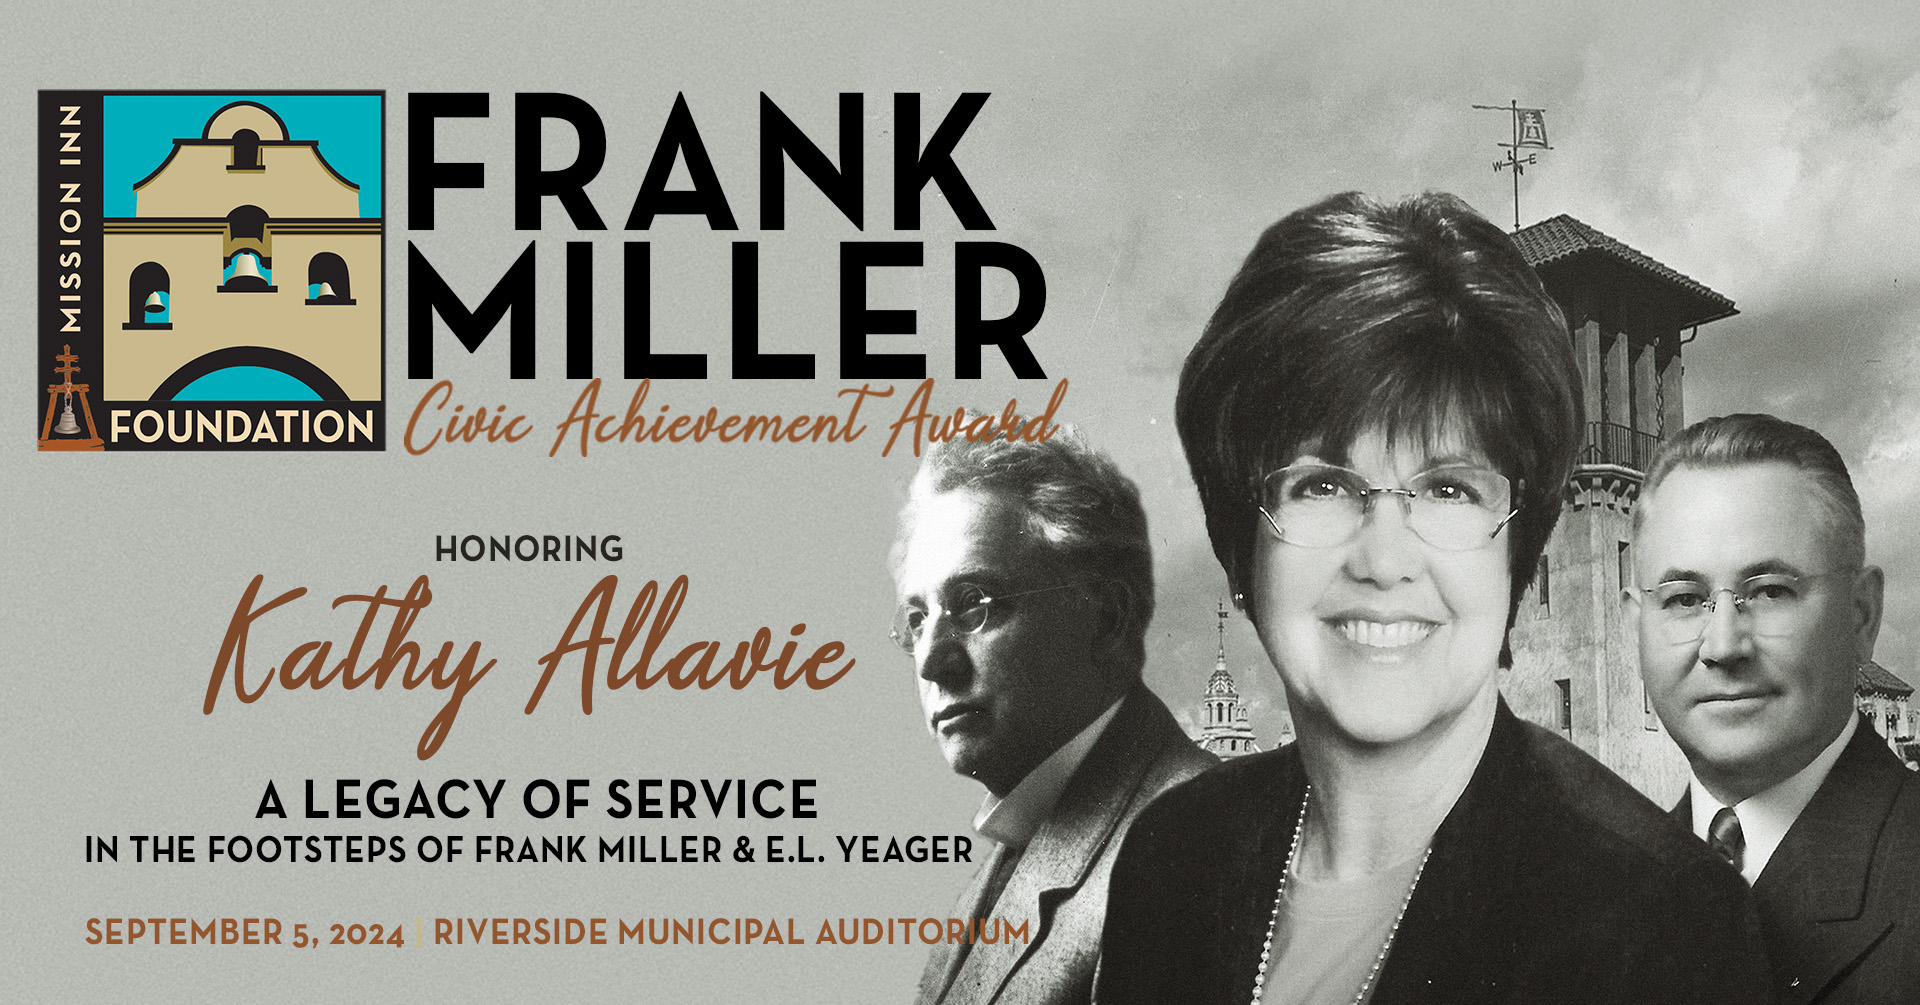 Poster for the Frank Miller Civic Achievement Award